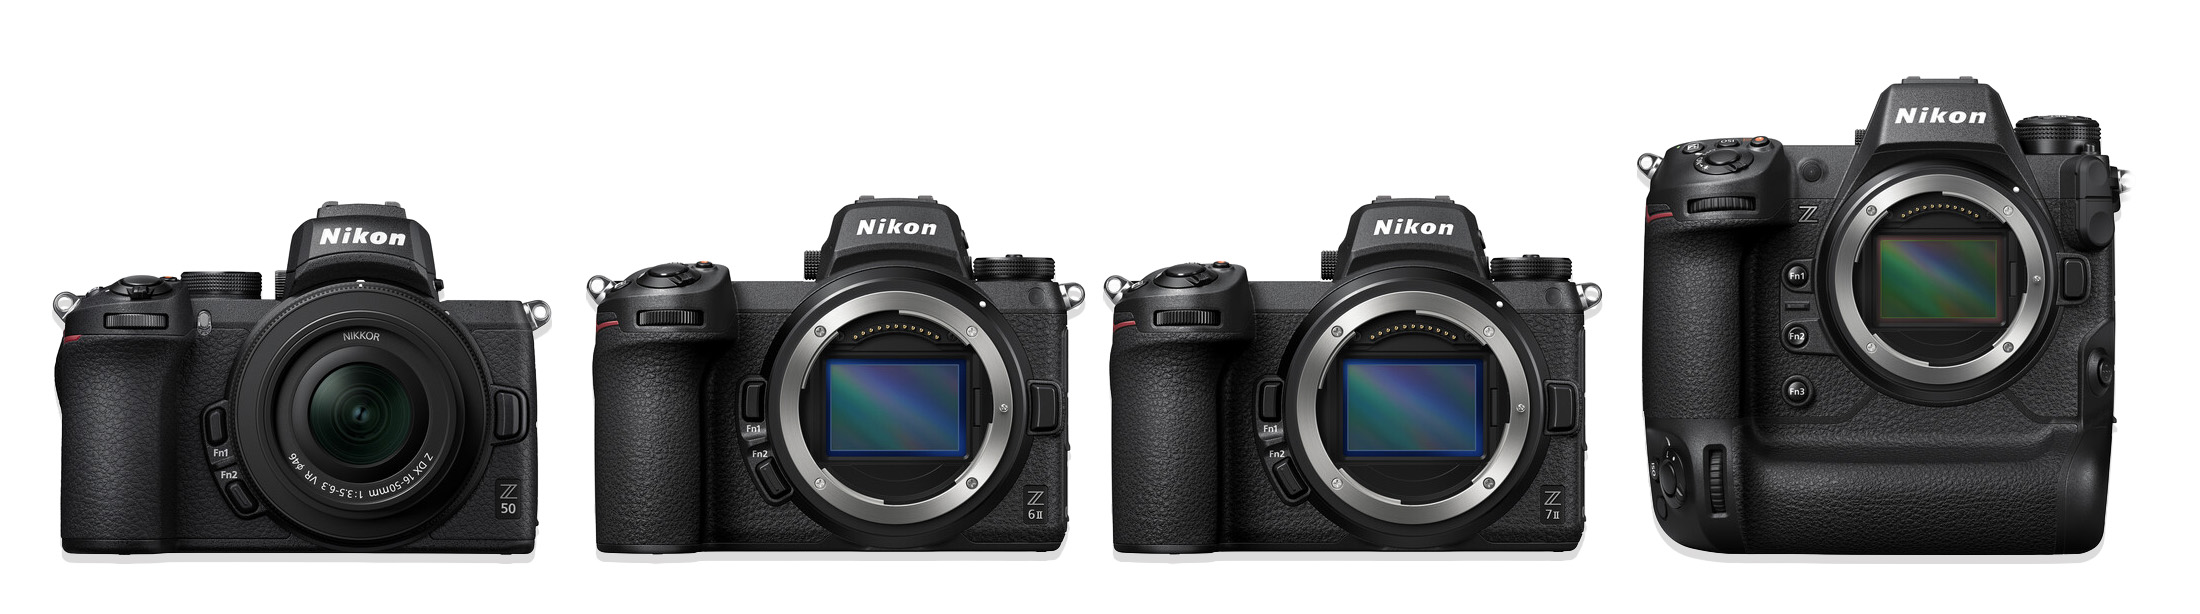 Nikon Z7 Review: A Top-Tier Mirrorless That Gets Nearly Everything Right